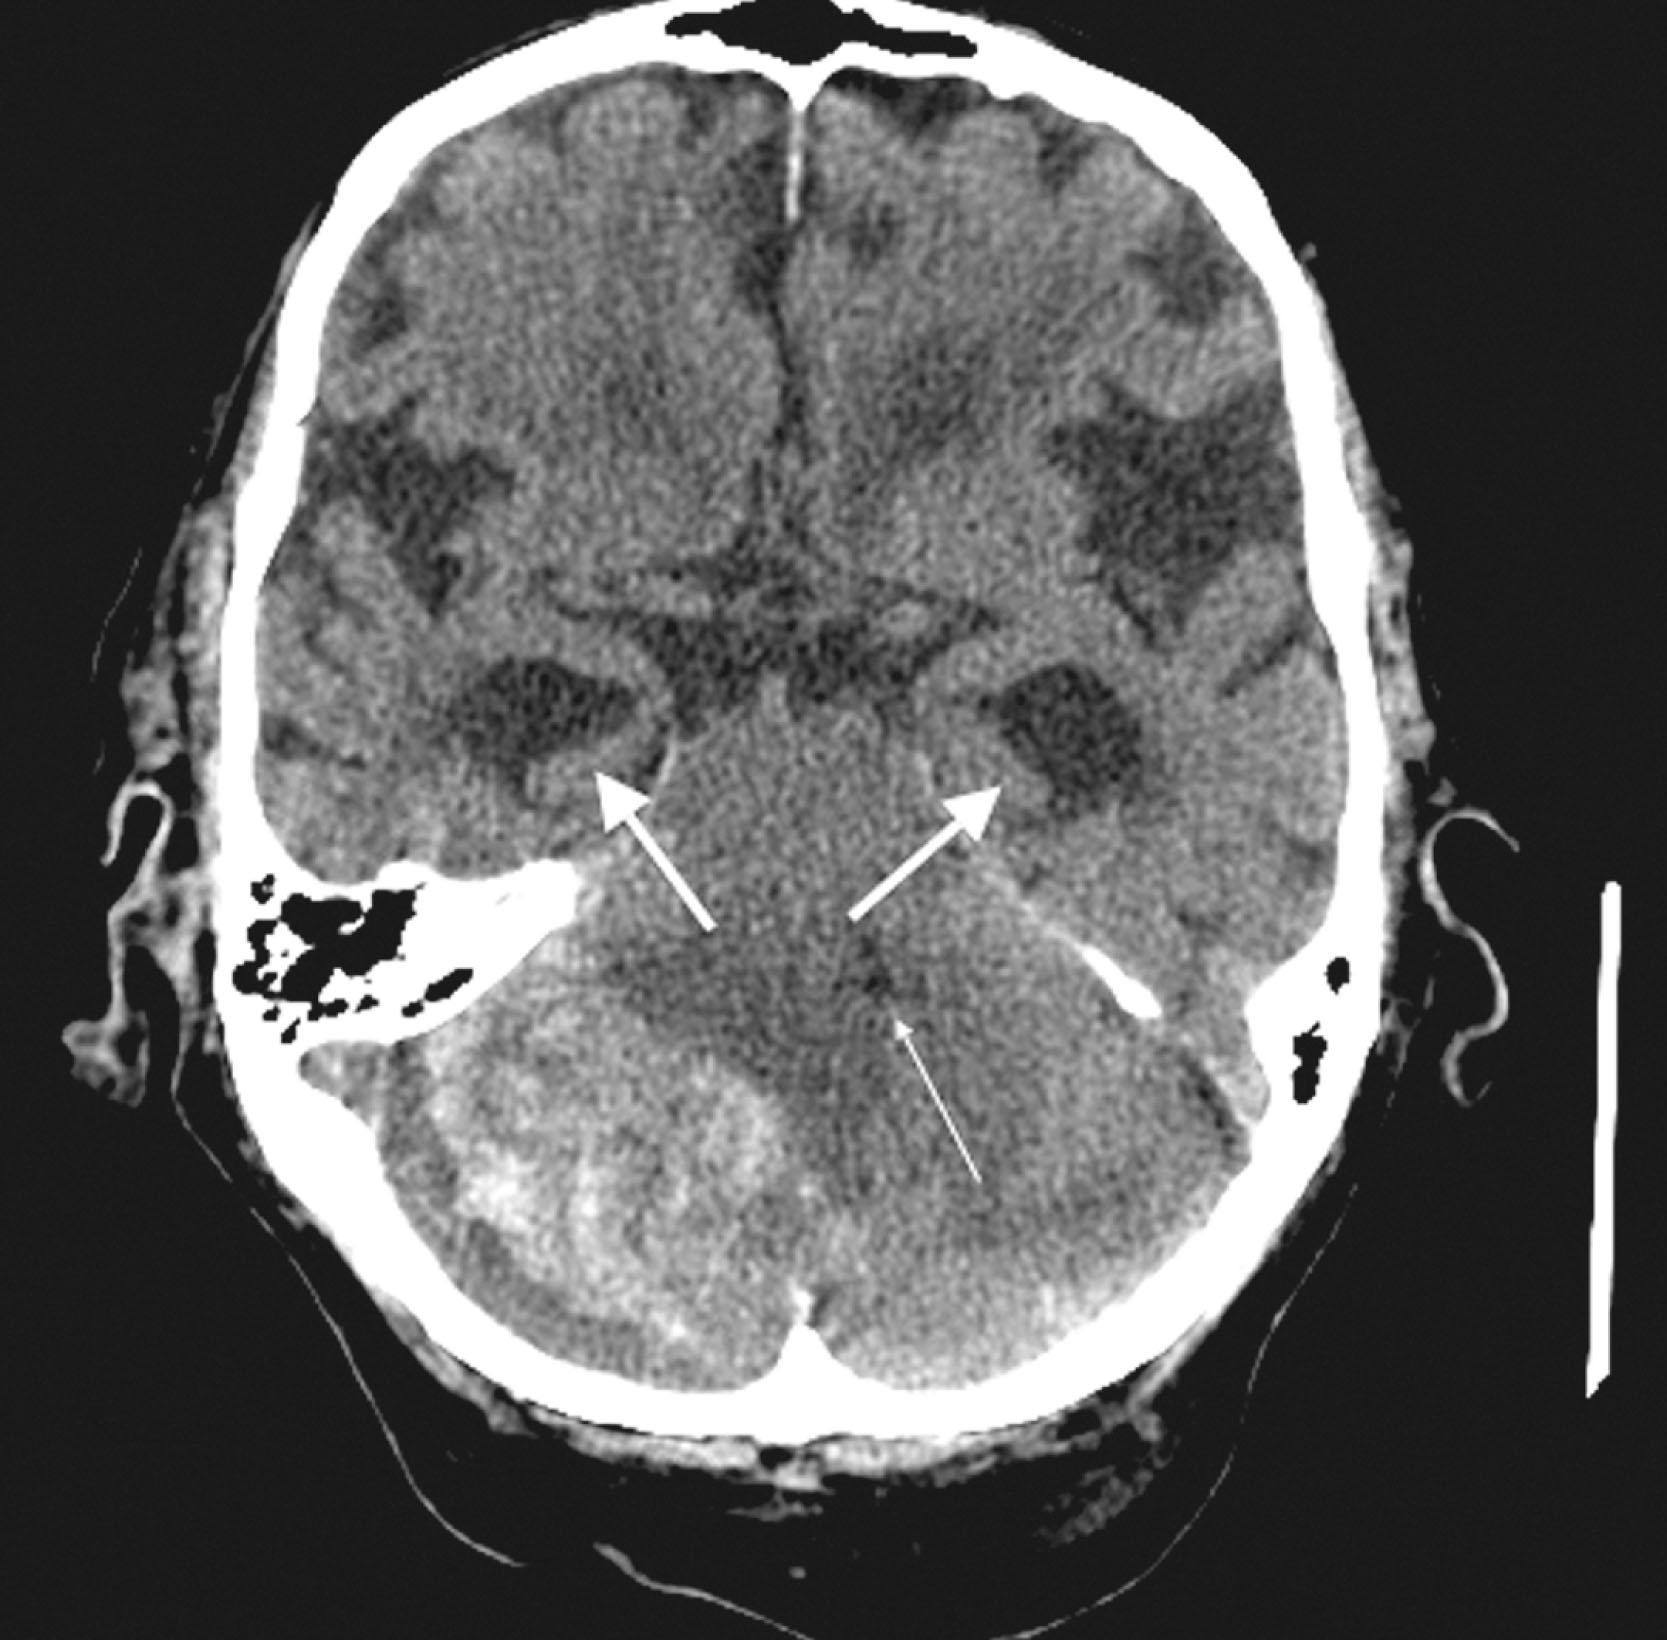 Fig. 20.14, This CT shows a large, patchy, hyperdense lesion in the posterior fossa. The lesion is a cerebellar hemorrhage that has compressed and shifted the fourth ventricle (thin arrow) , blocking cerebrospinal fluid passage. The resulting obstructive hydrocephalus has caused dilation of the temporal horns of the lateral ventricles (arrows) .